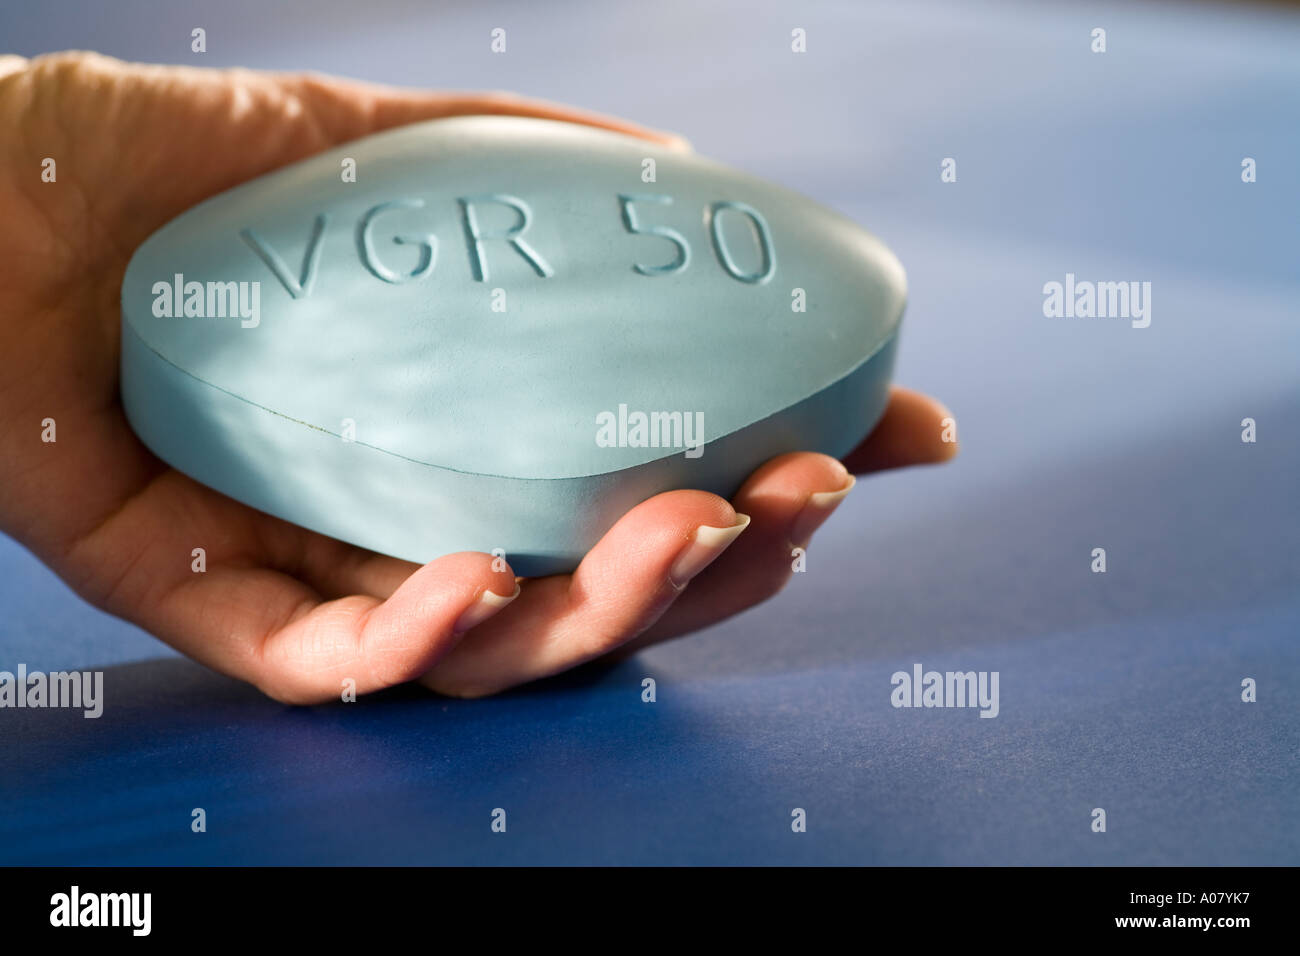 blue-obsession-female-hand-holding-huge-tablet-of-viagra-a07yk7.jpg